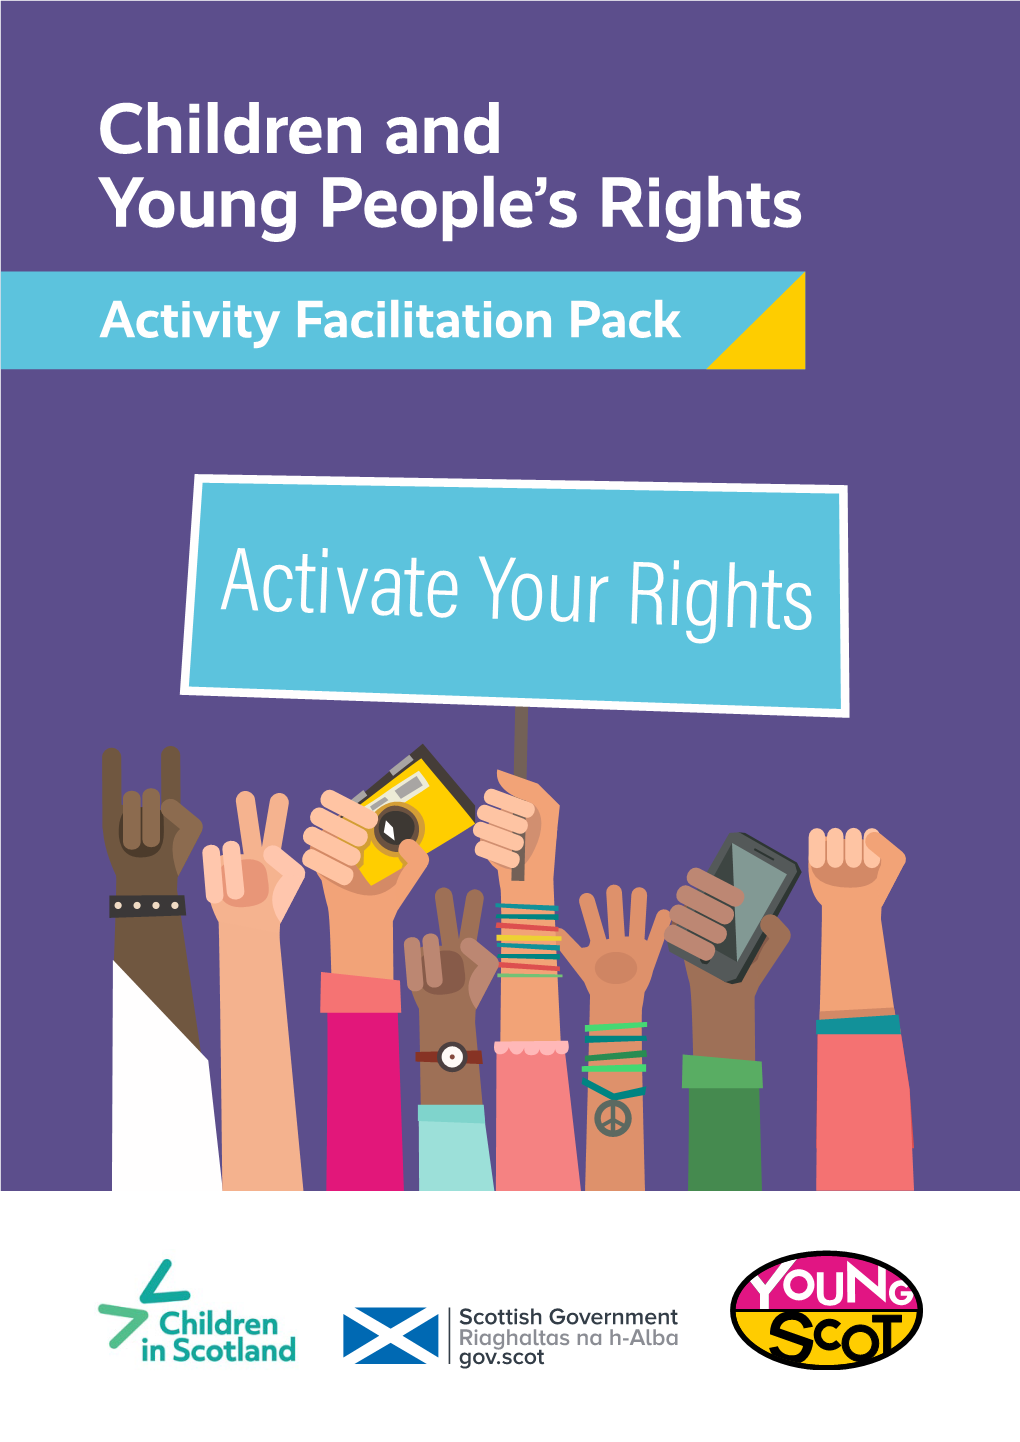 Activate Your Rights Contents